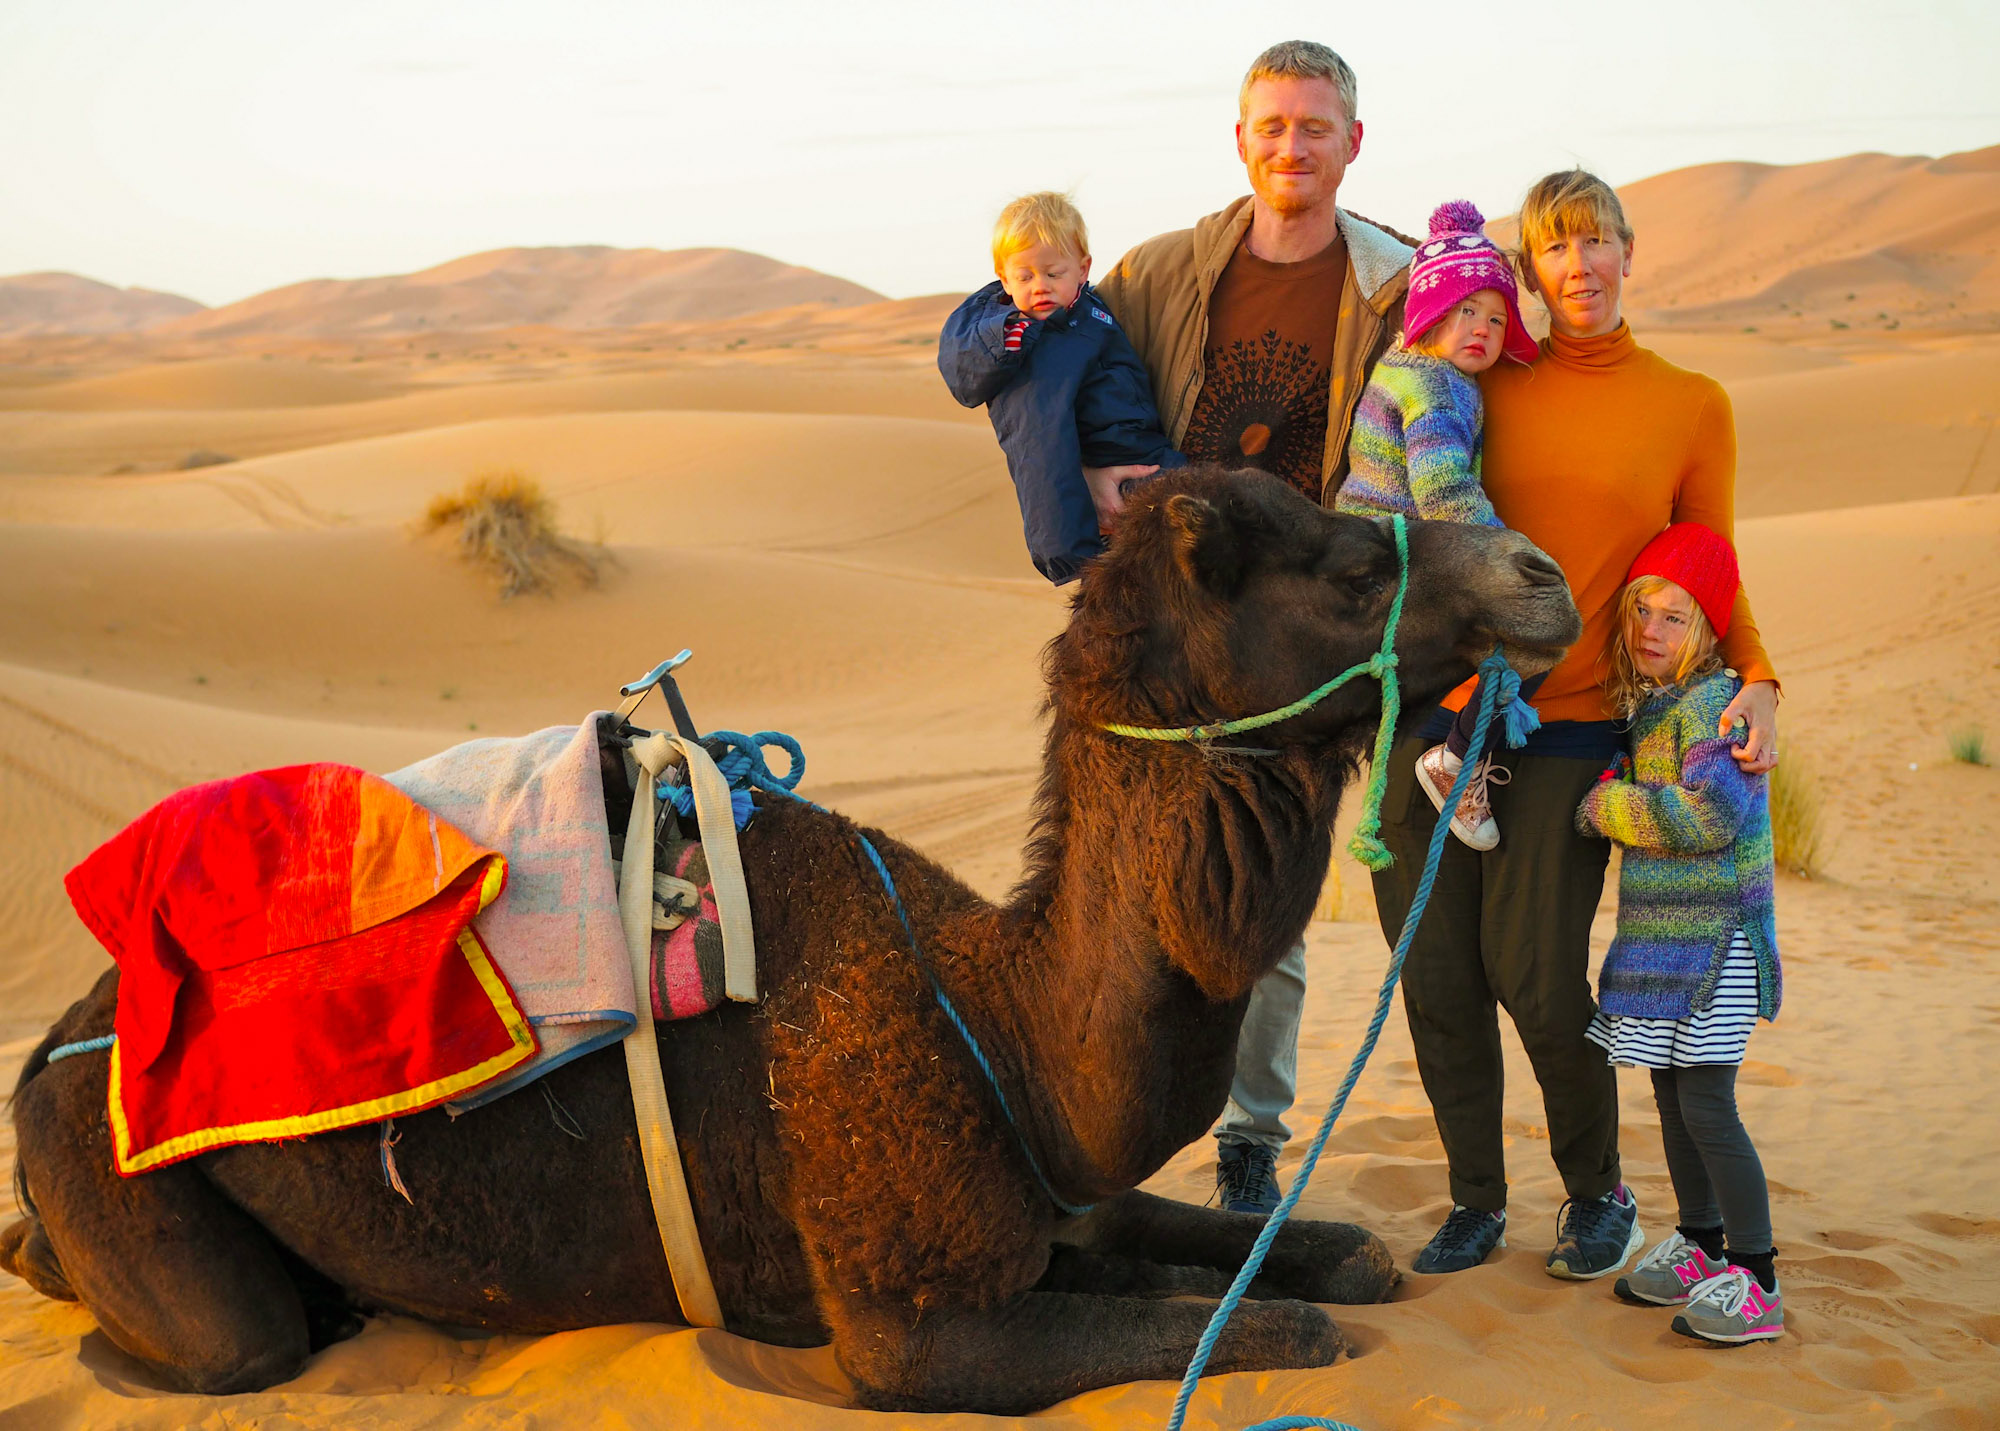 Family with small children stood next to a camel in the Sahara Desert